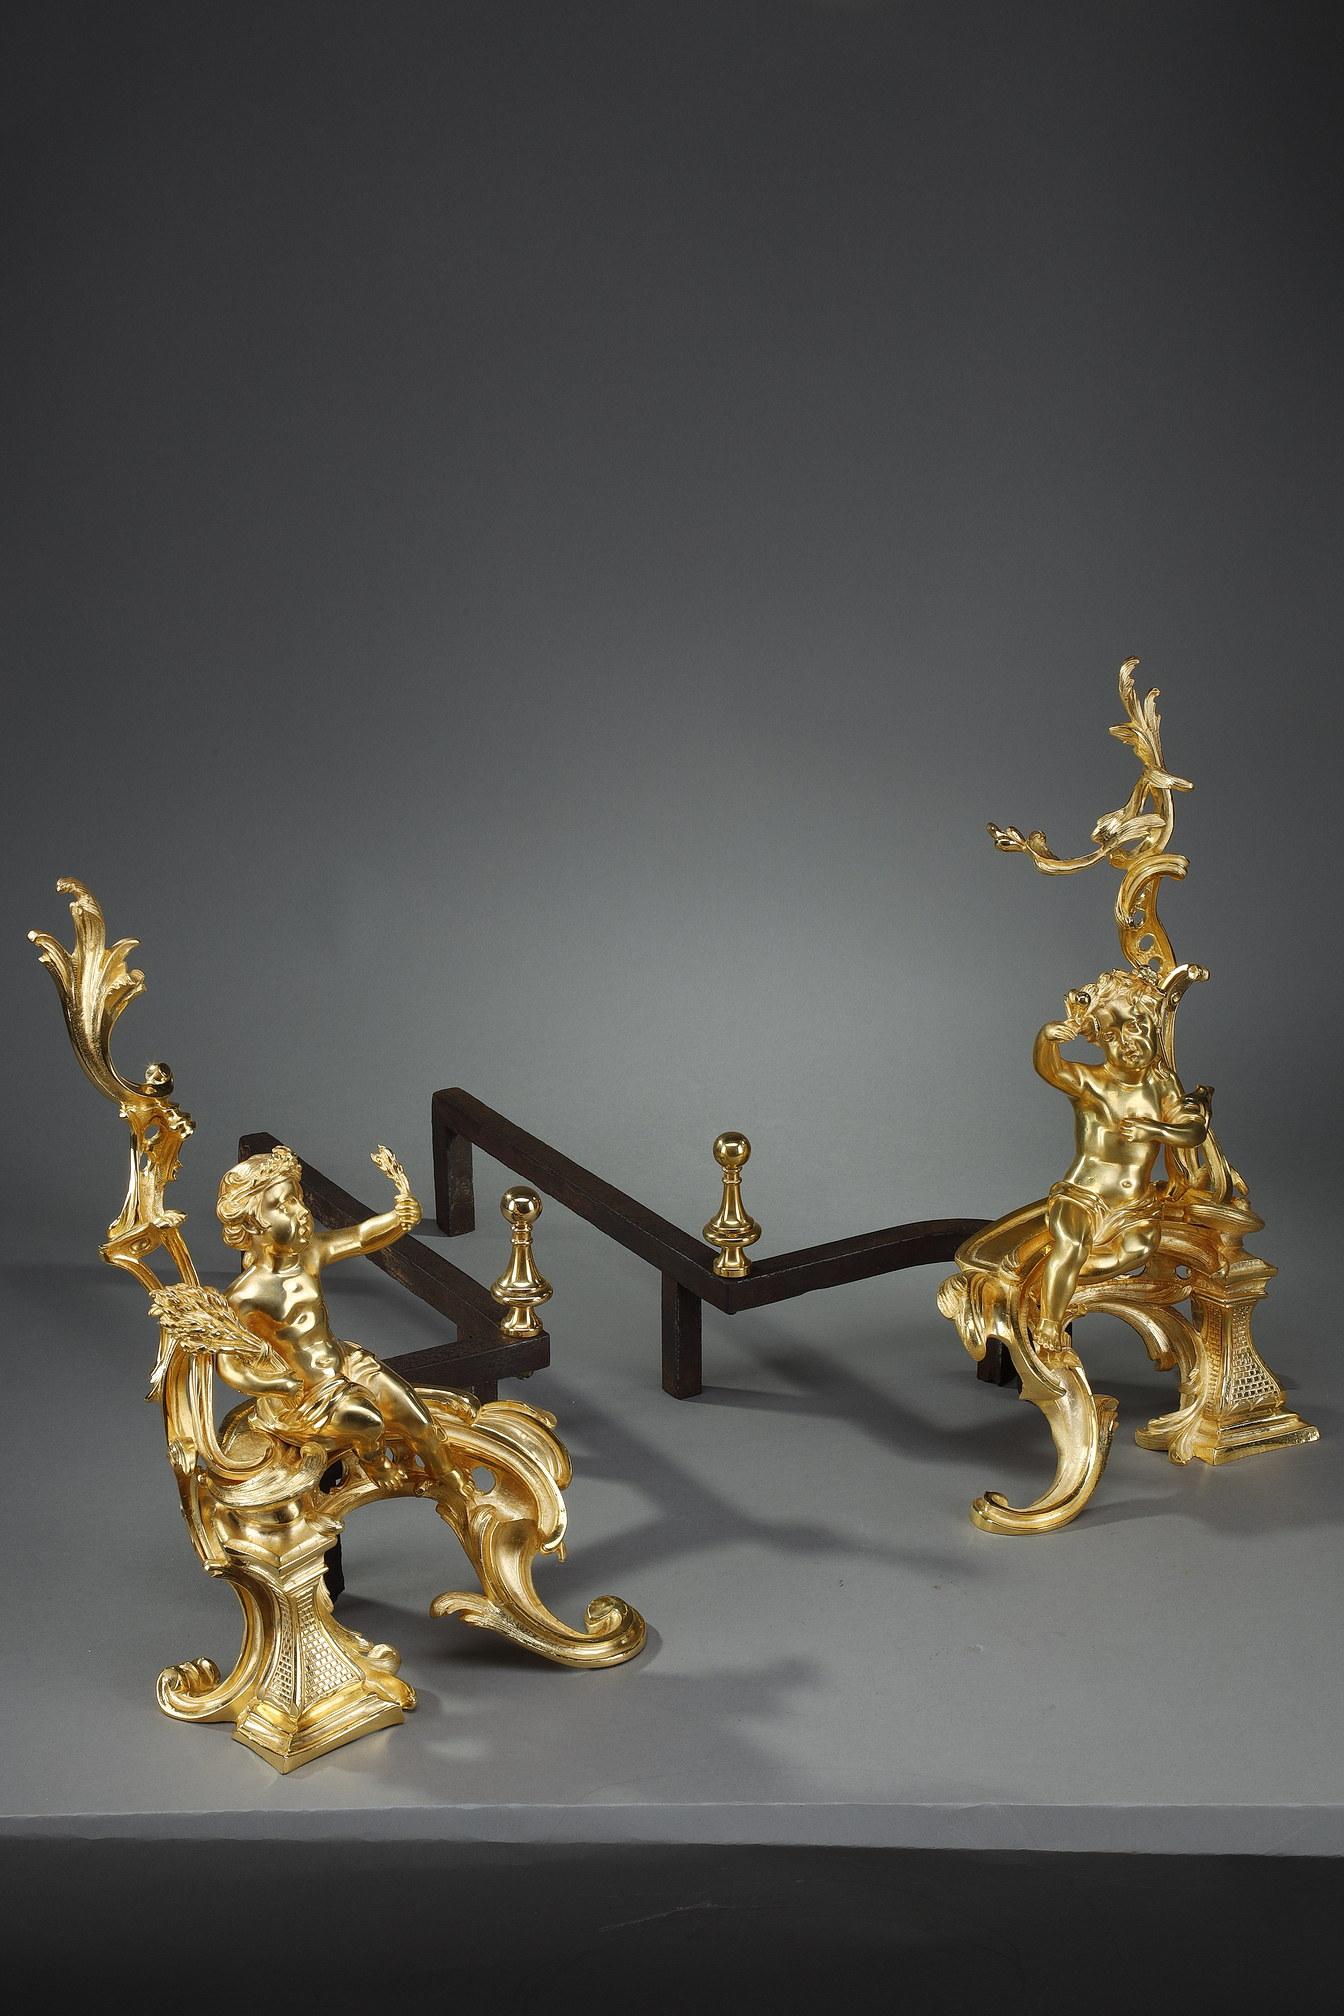 Pair of Louis XV style andirons with rocaille decoration. They are decorated with ormolu and chased putti sitting on a moving base. One putto wearing a crown of wheat is holding a sheaf of wheat, while the other holding his drape is holding flowers.